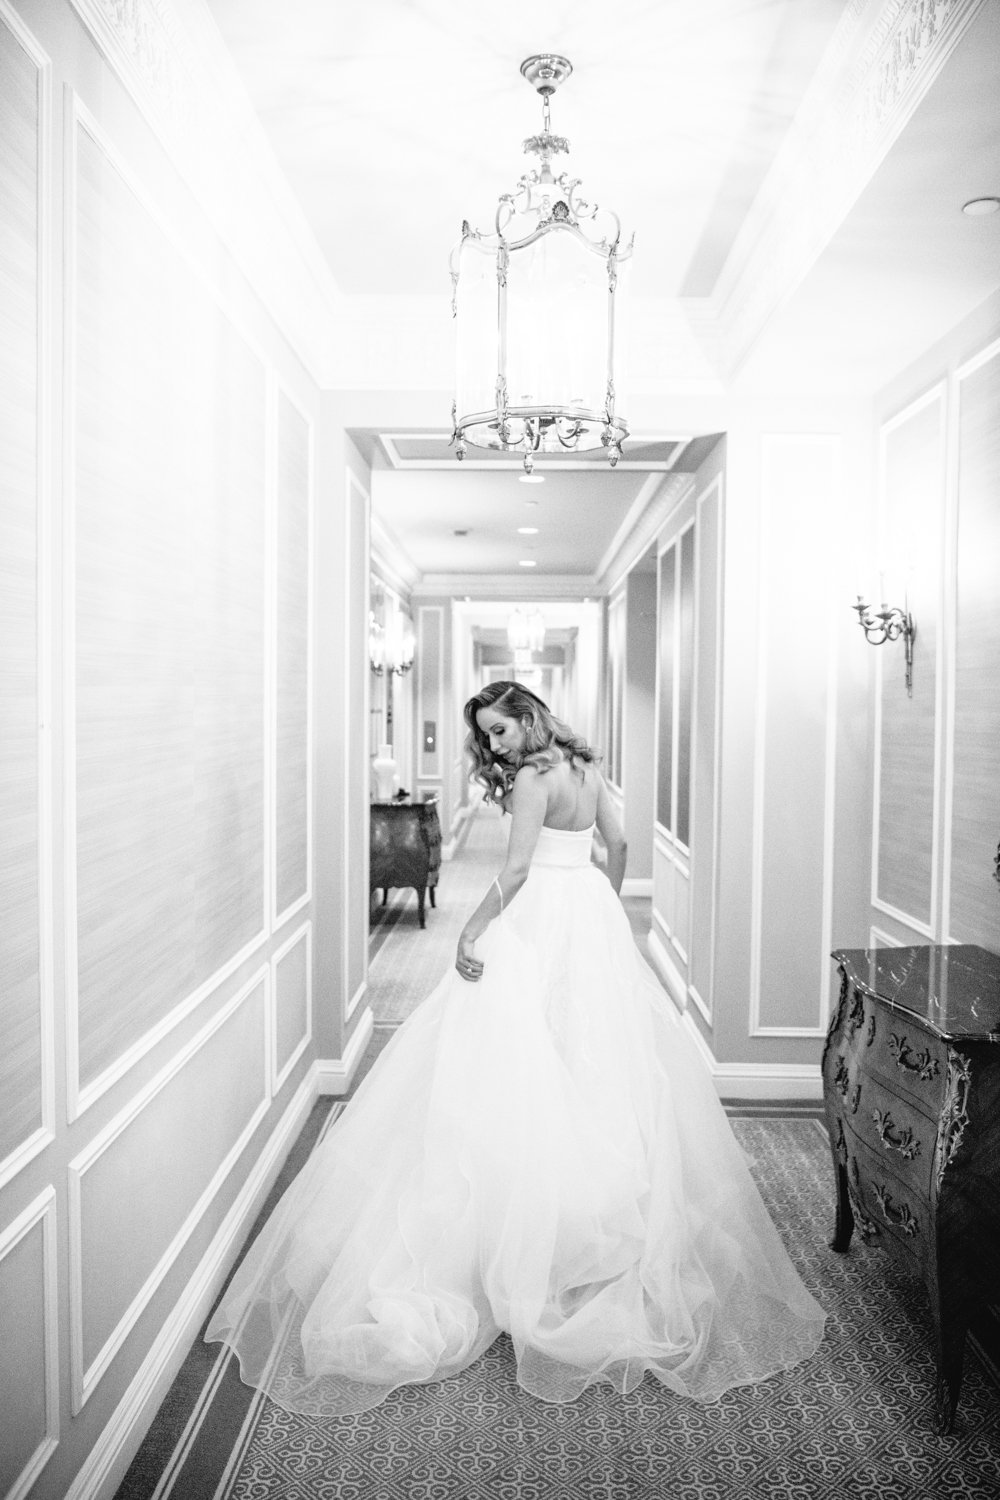 Bride is wearing a strapless wedding gown and walking away from the camera down the hallway of the St. Regis in Manhattan. She is looking back at the train of her dress.

Manhattan Luxury Wedding. New York Luxury Wedding Photographer. Wedding in Manhattan. NYC Luxury Wedding.